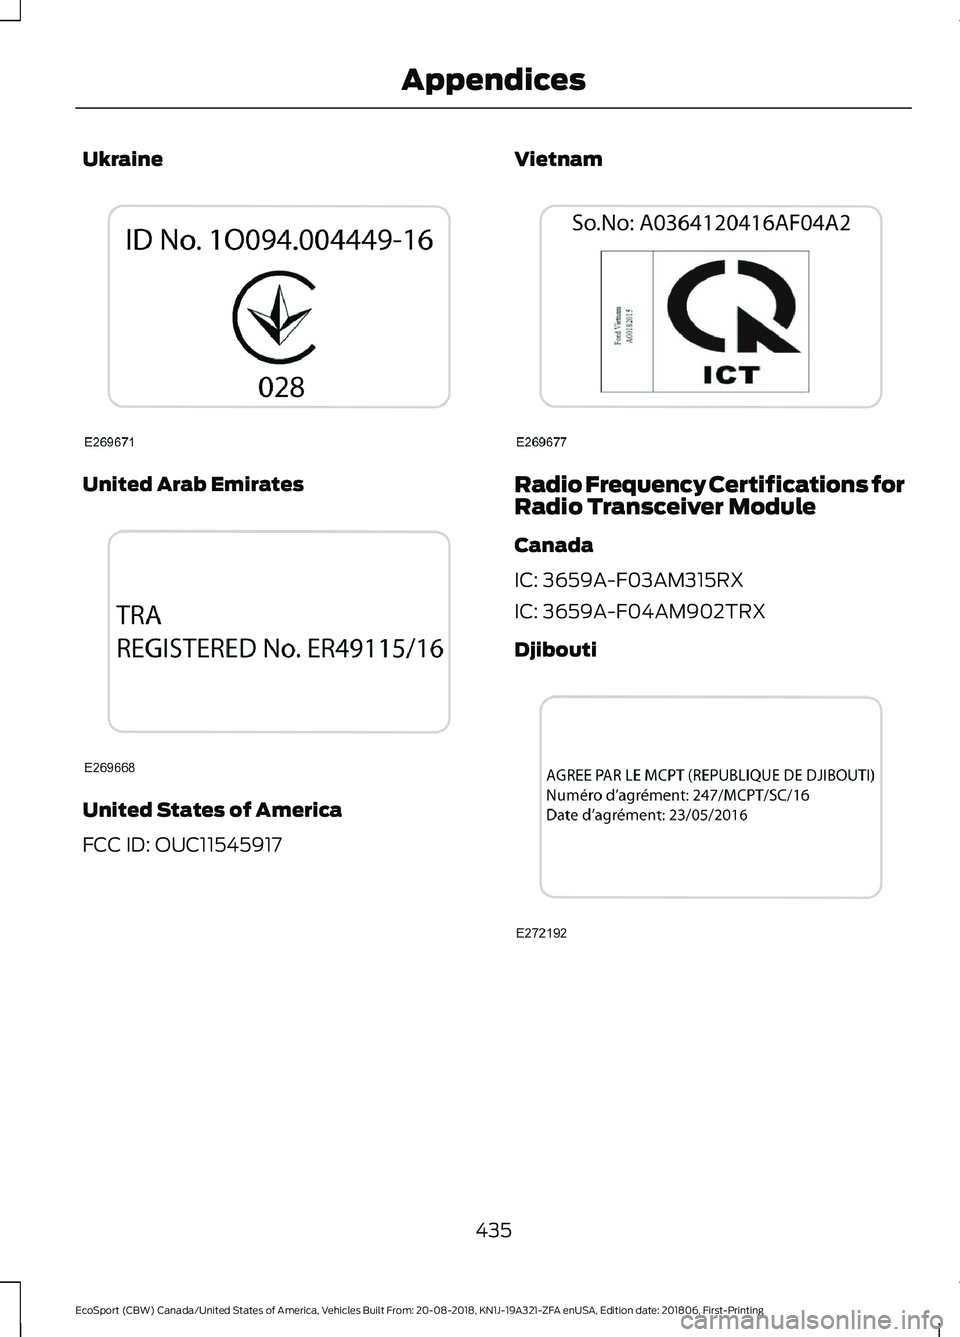 FORD ECOSPORT 2019  Owners Manual Ukraine
United Arab Emirates
United States of America
FCC ID: OUC11545917
Vietnam
Radio Frequency Certifications forRadio Transceiver Module
Canada
IC: 3659A-F03AM315RX
IC: 3659A-F04AM902TRX
Djibouti
